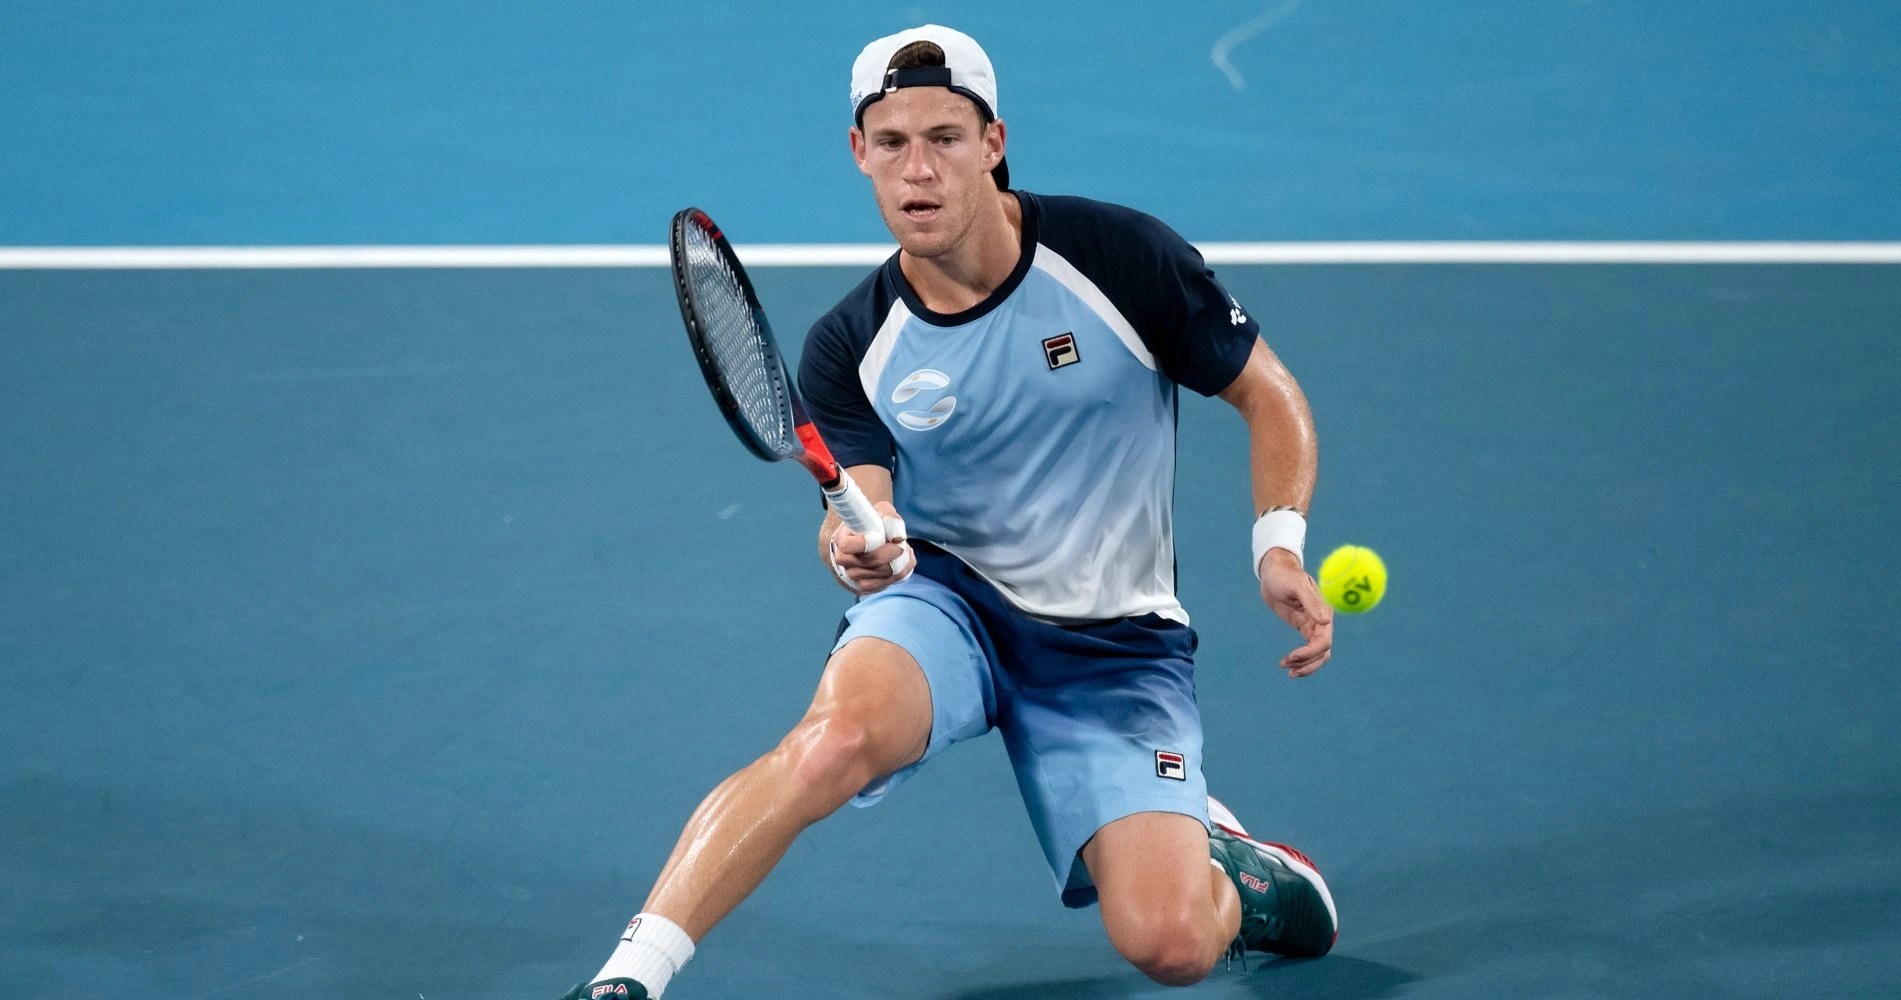 Tennis Everything you always wanted to know about Diego Schwartzman